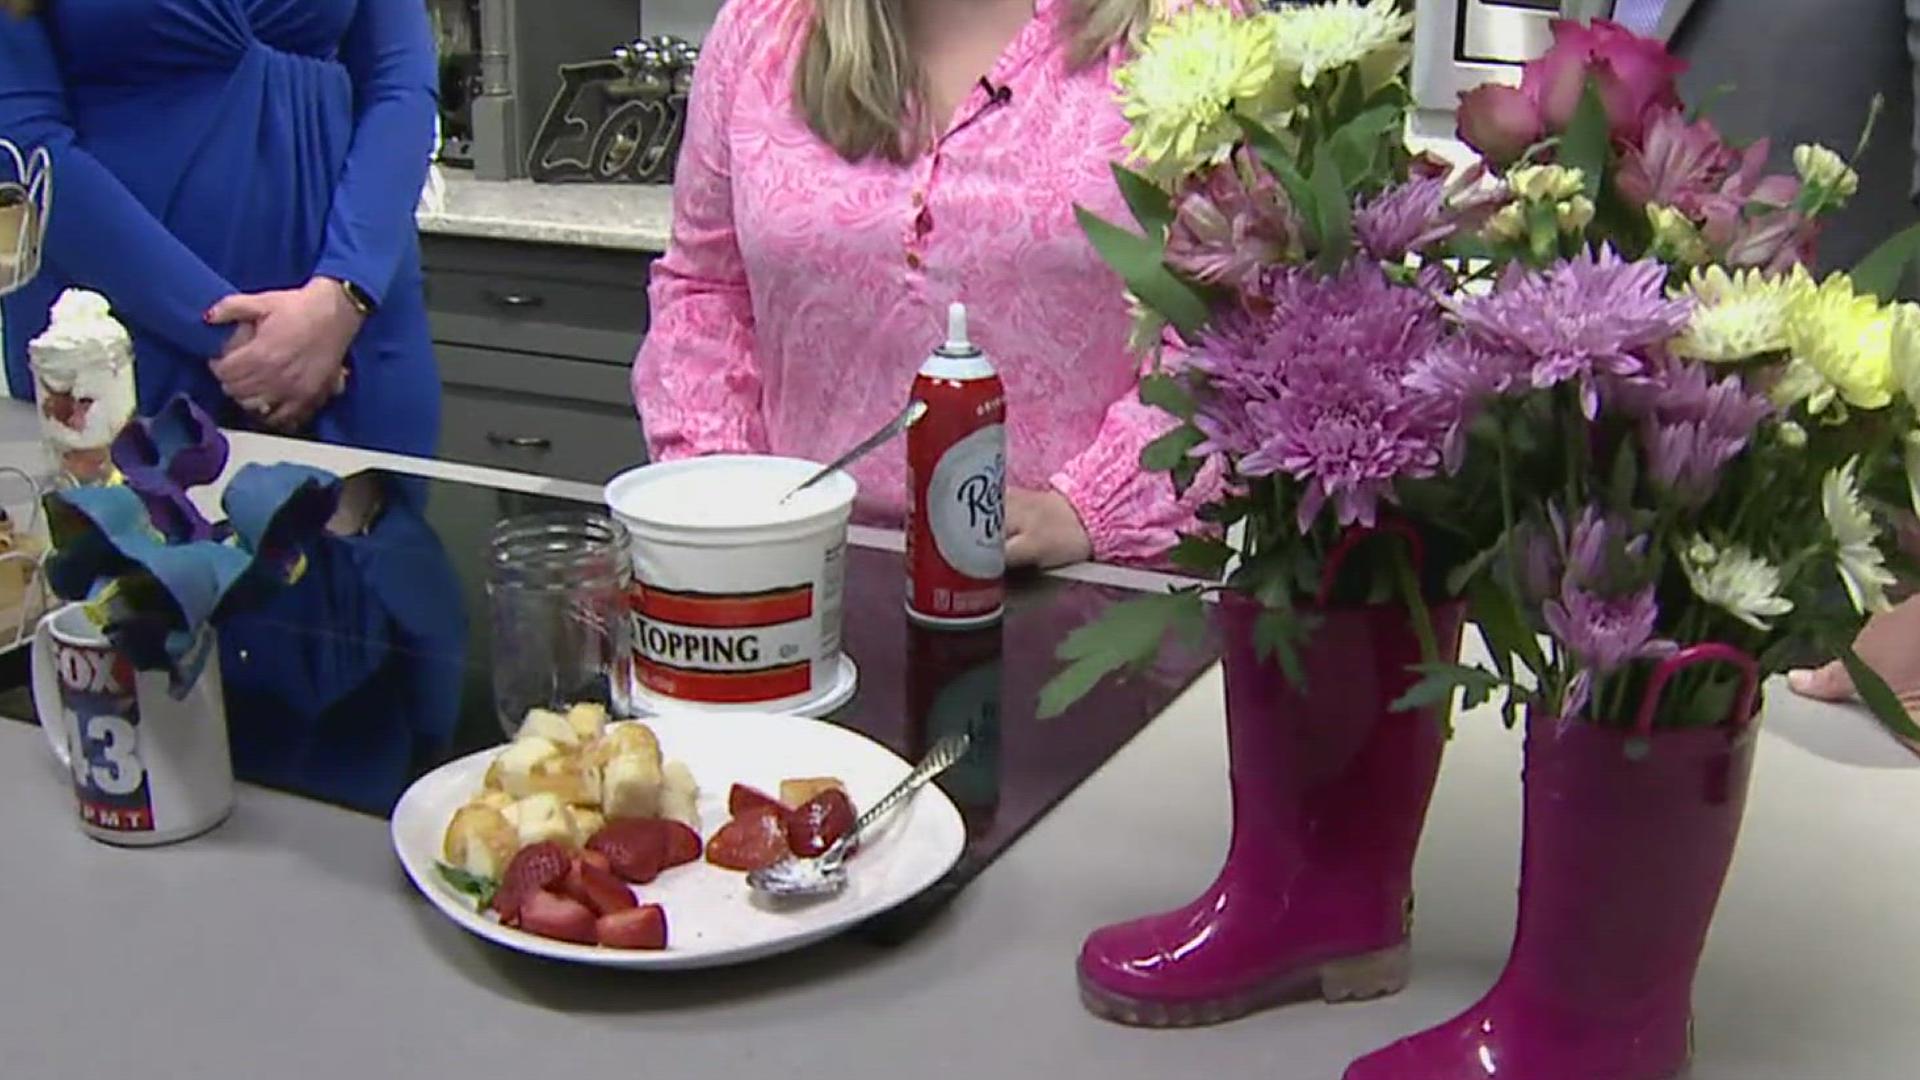 Party Host Helpers has three ideas for crafts that will brighten mom's day this Mother's Day.